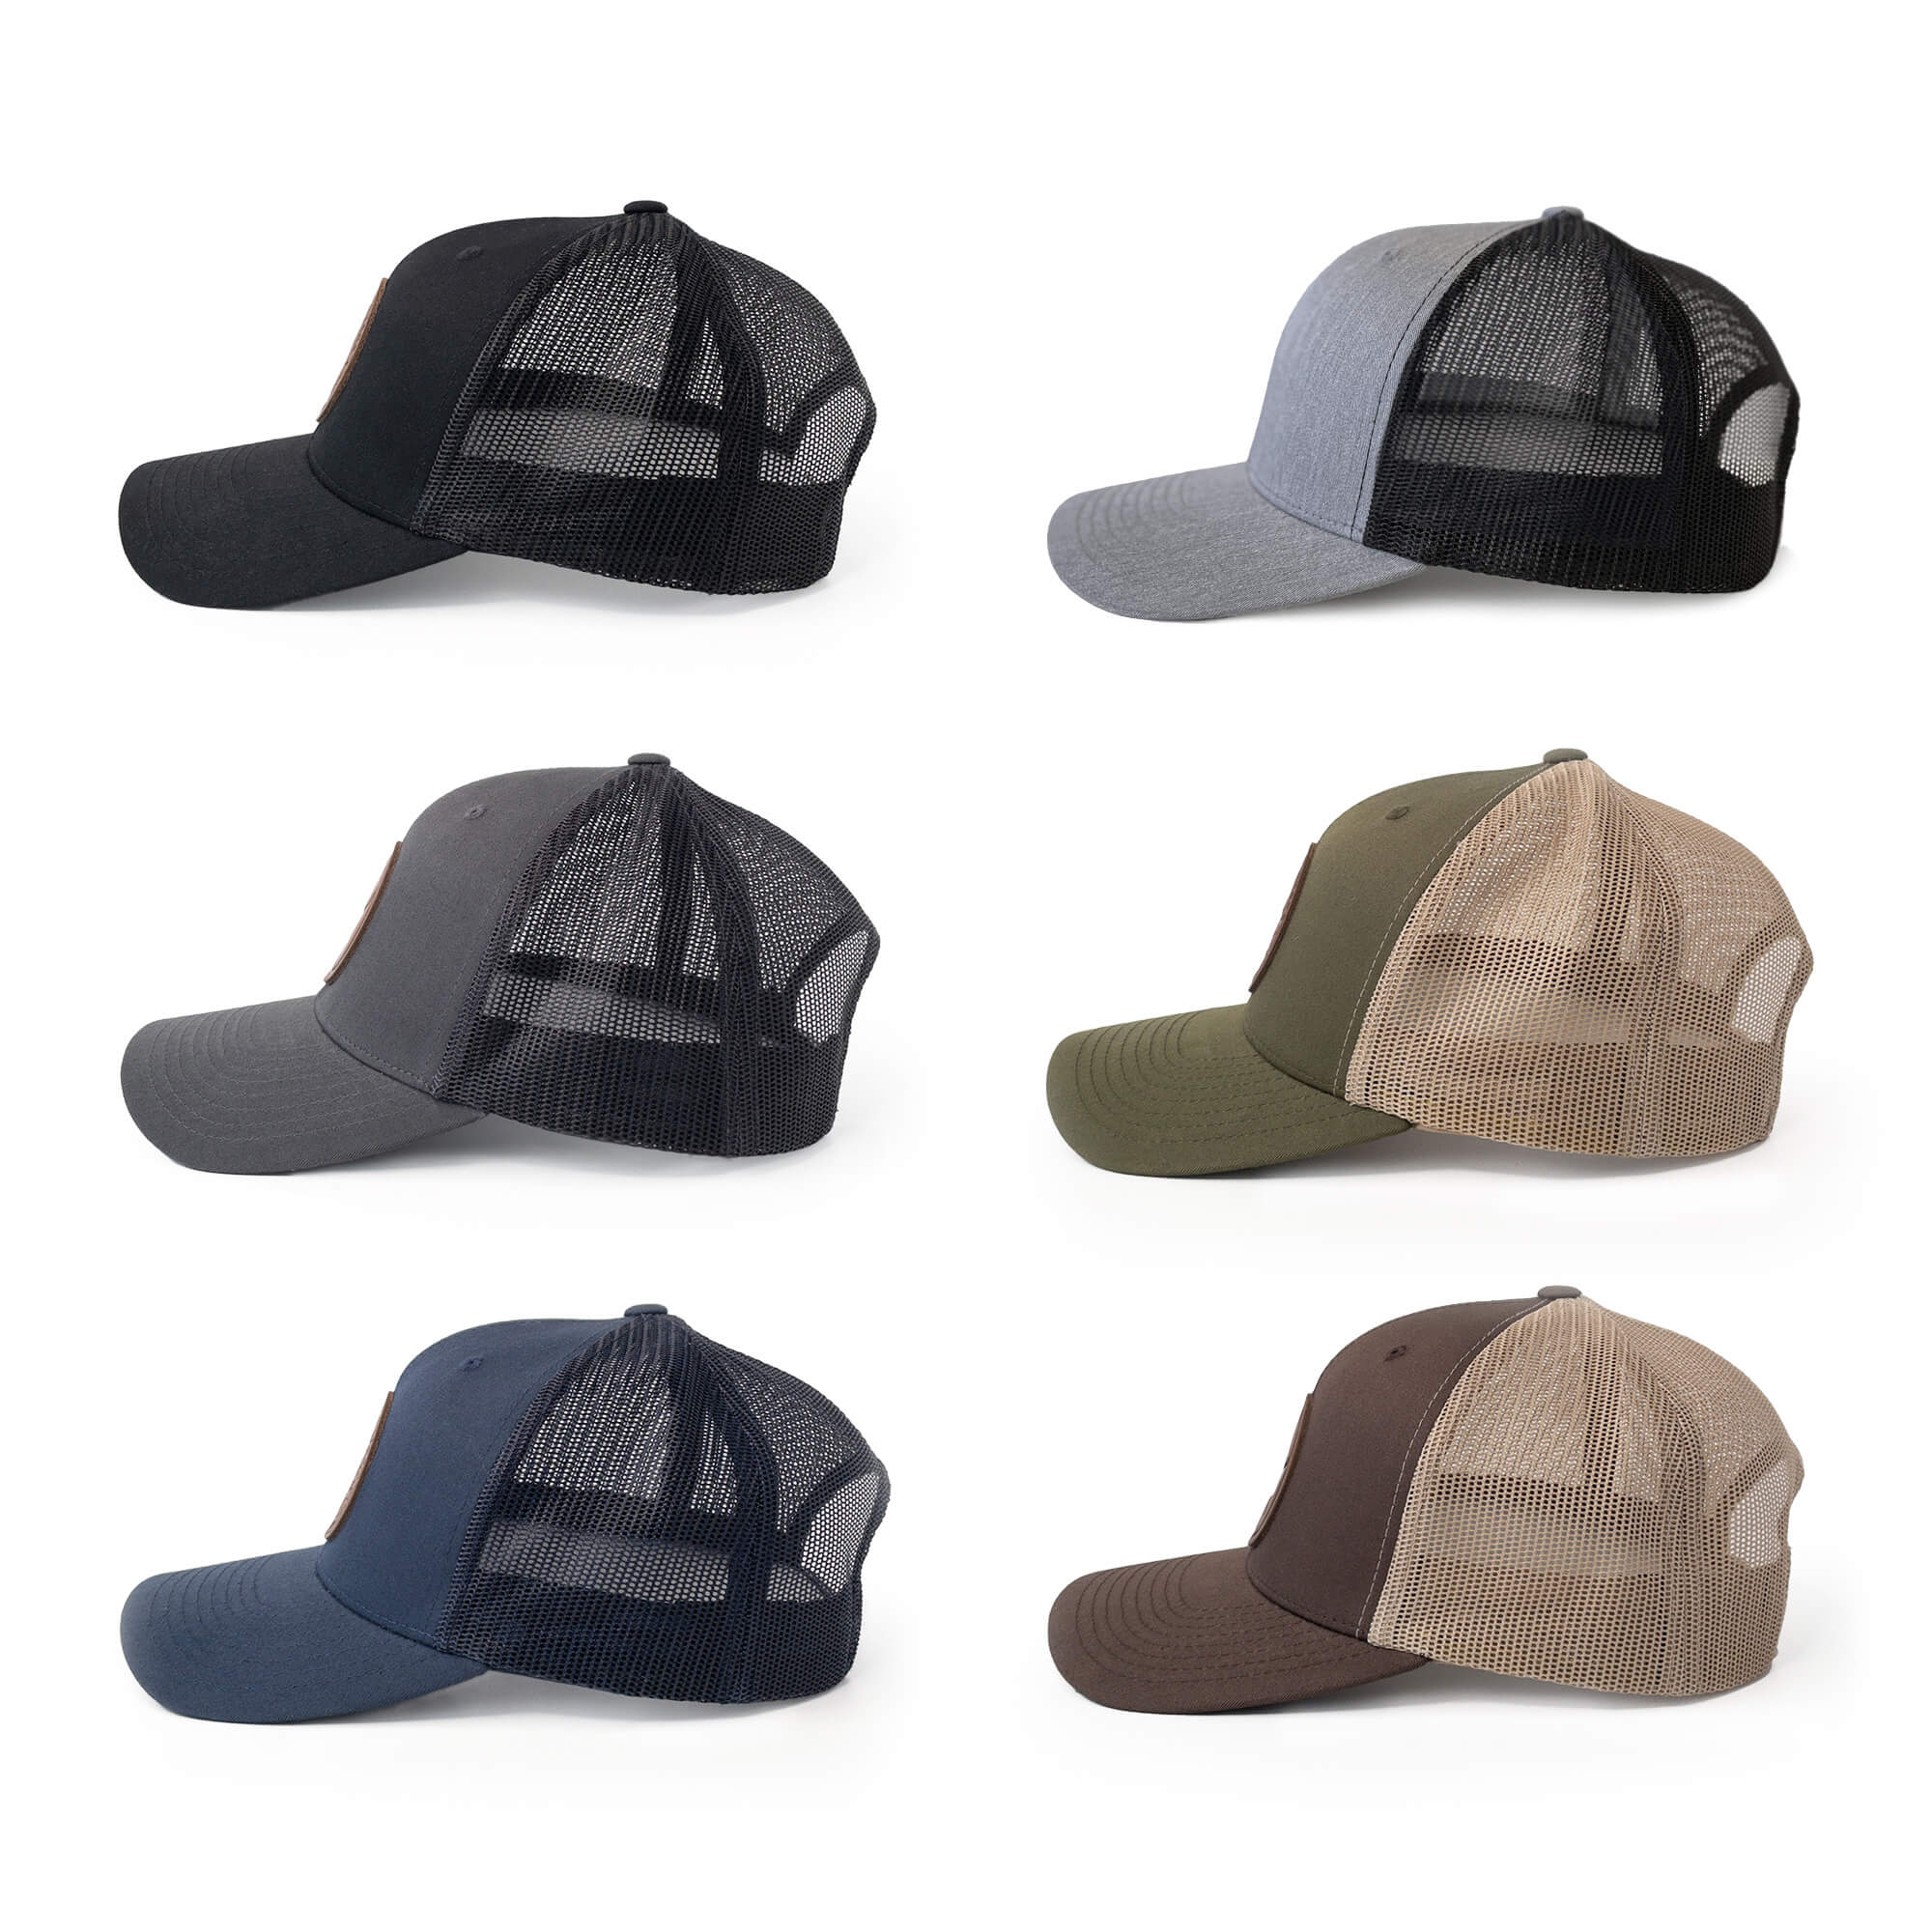 Leather patch trucker hats available in 6 colors | BLACK-007-003, CHARC-007-003, NAVY-007-003, HGREY-007-003, MOSS-007-003, BROWN-007-003